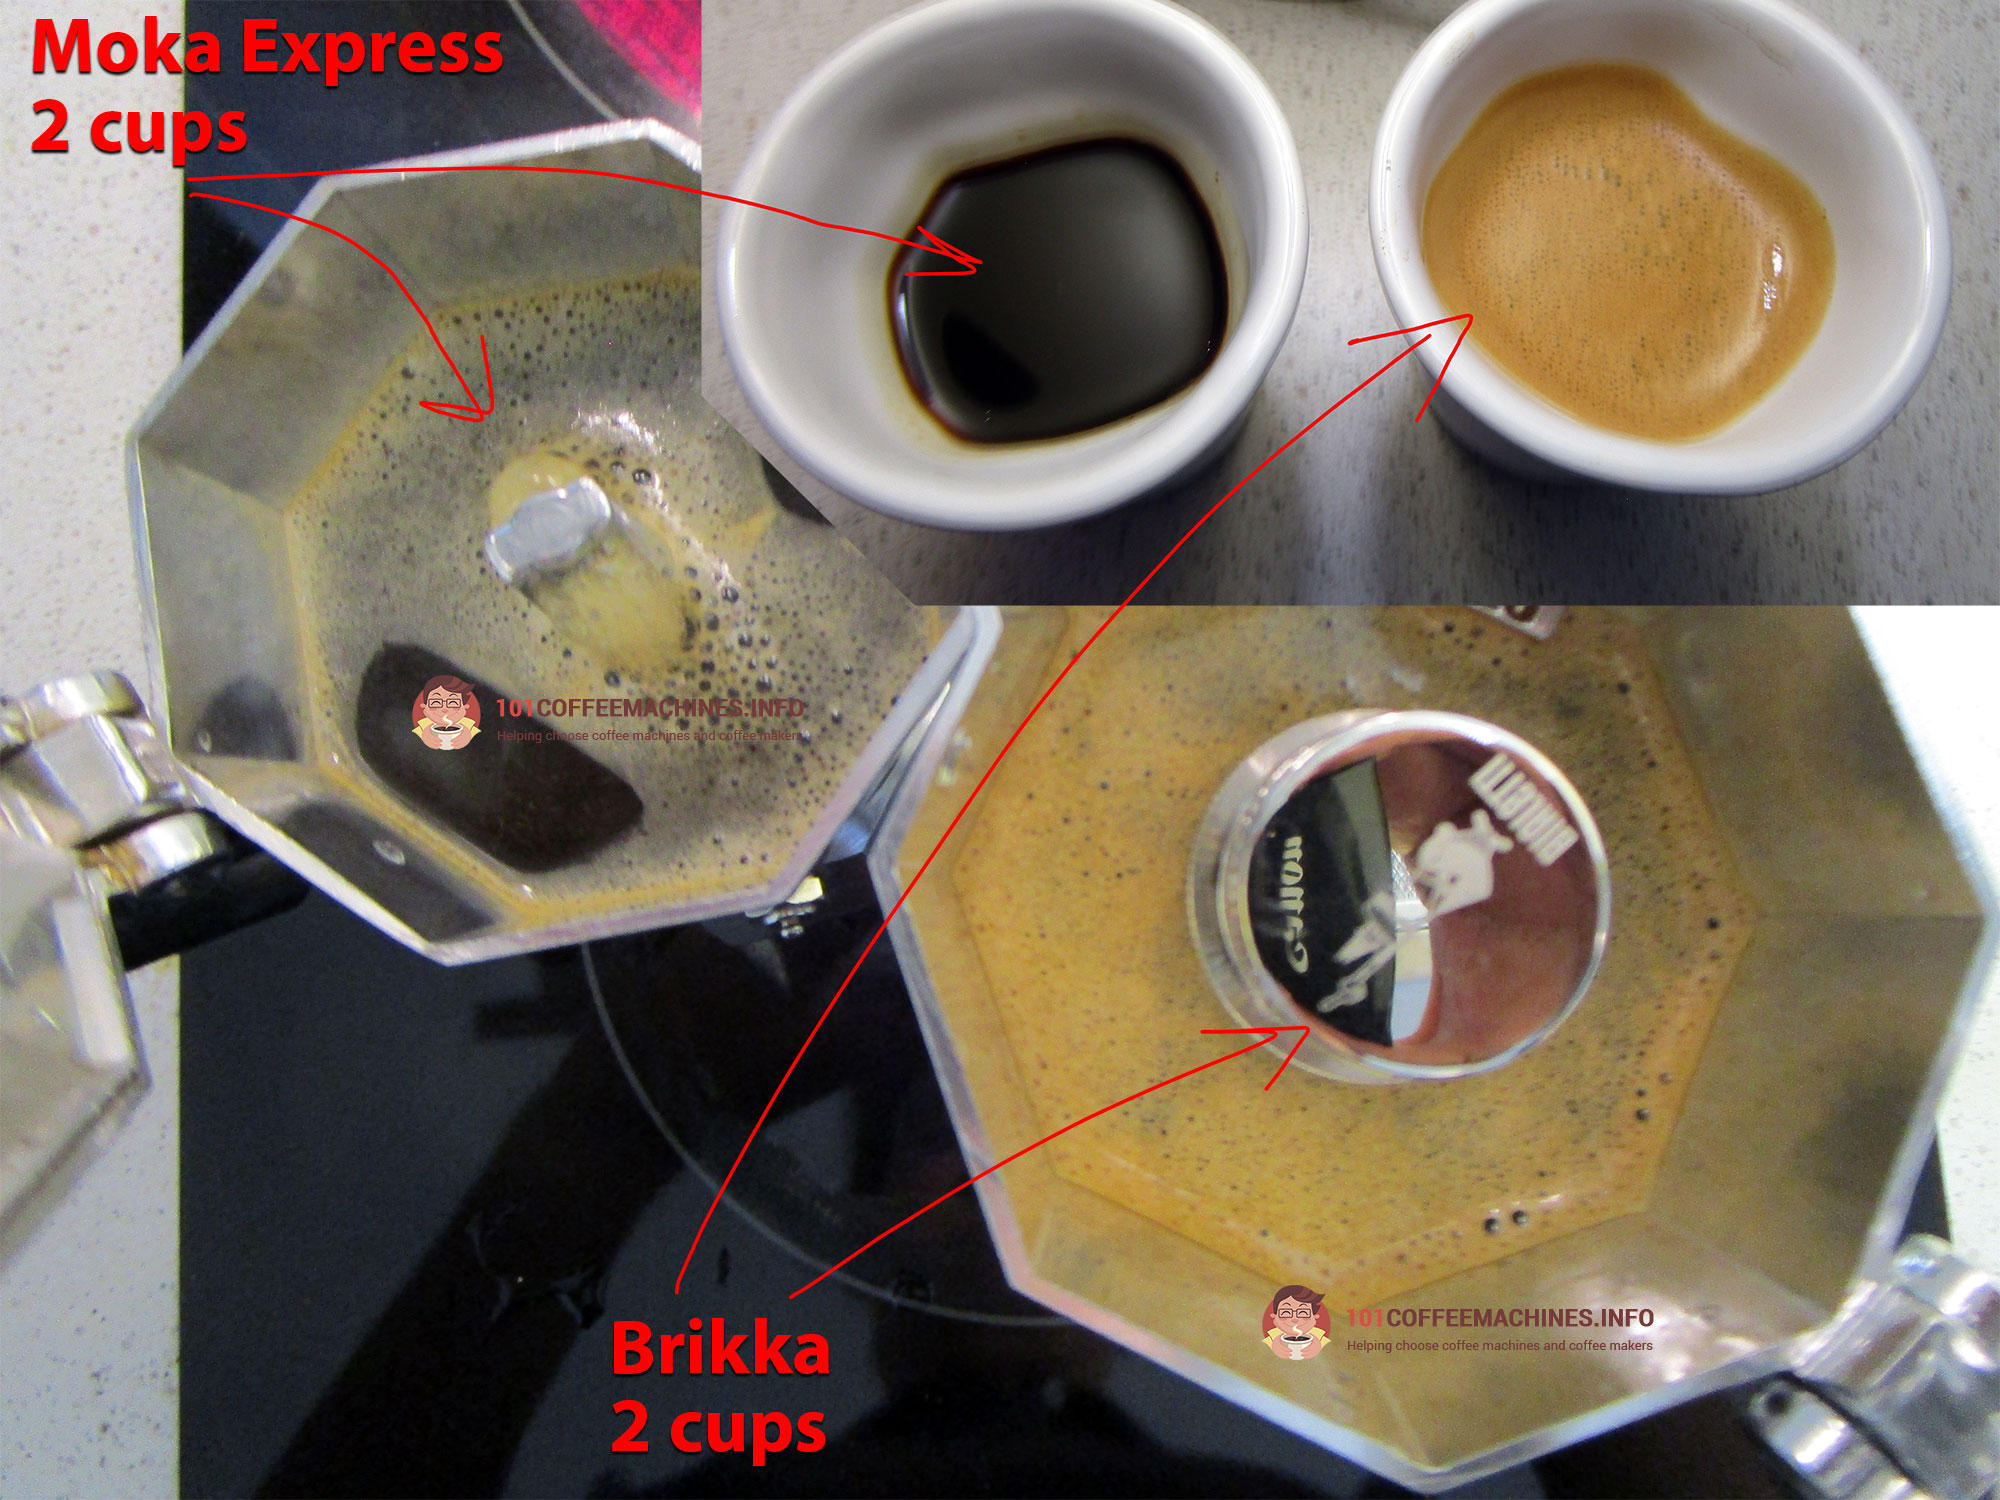 Bialetti Brikka 2020 review, how to clean and fix by Avi - Schneor Design